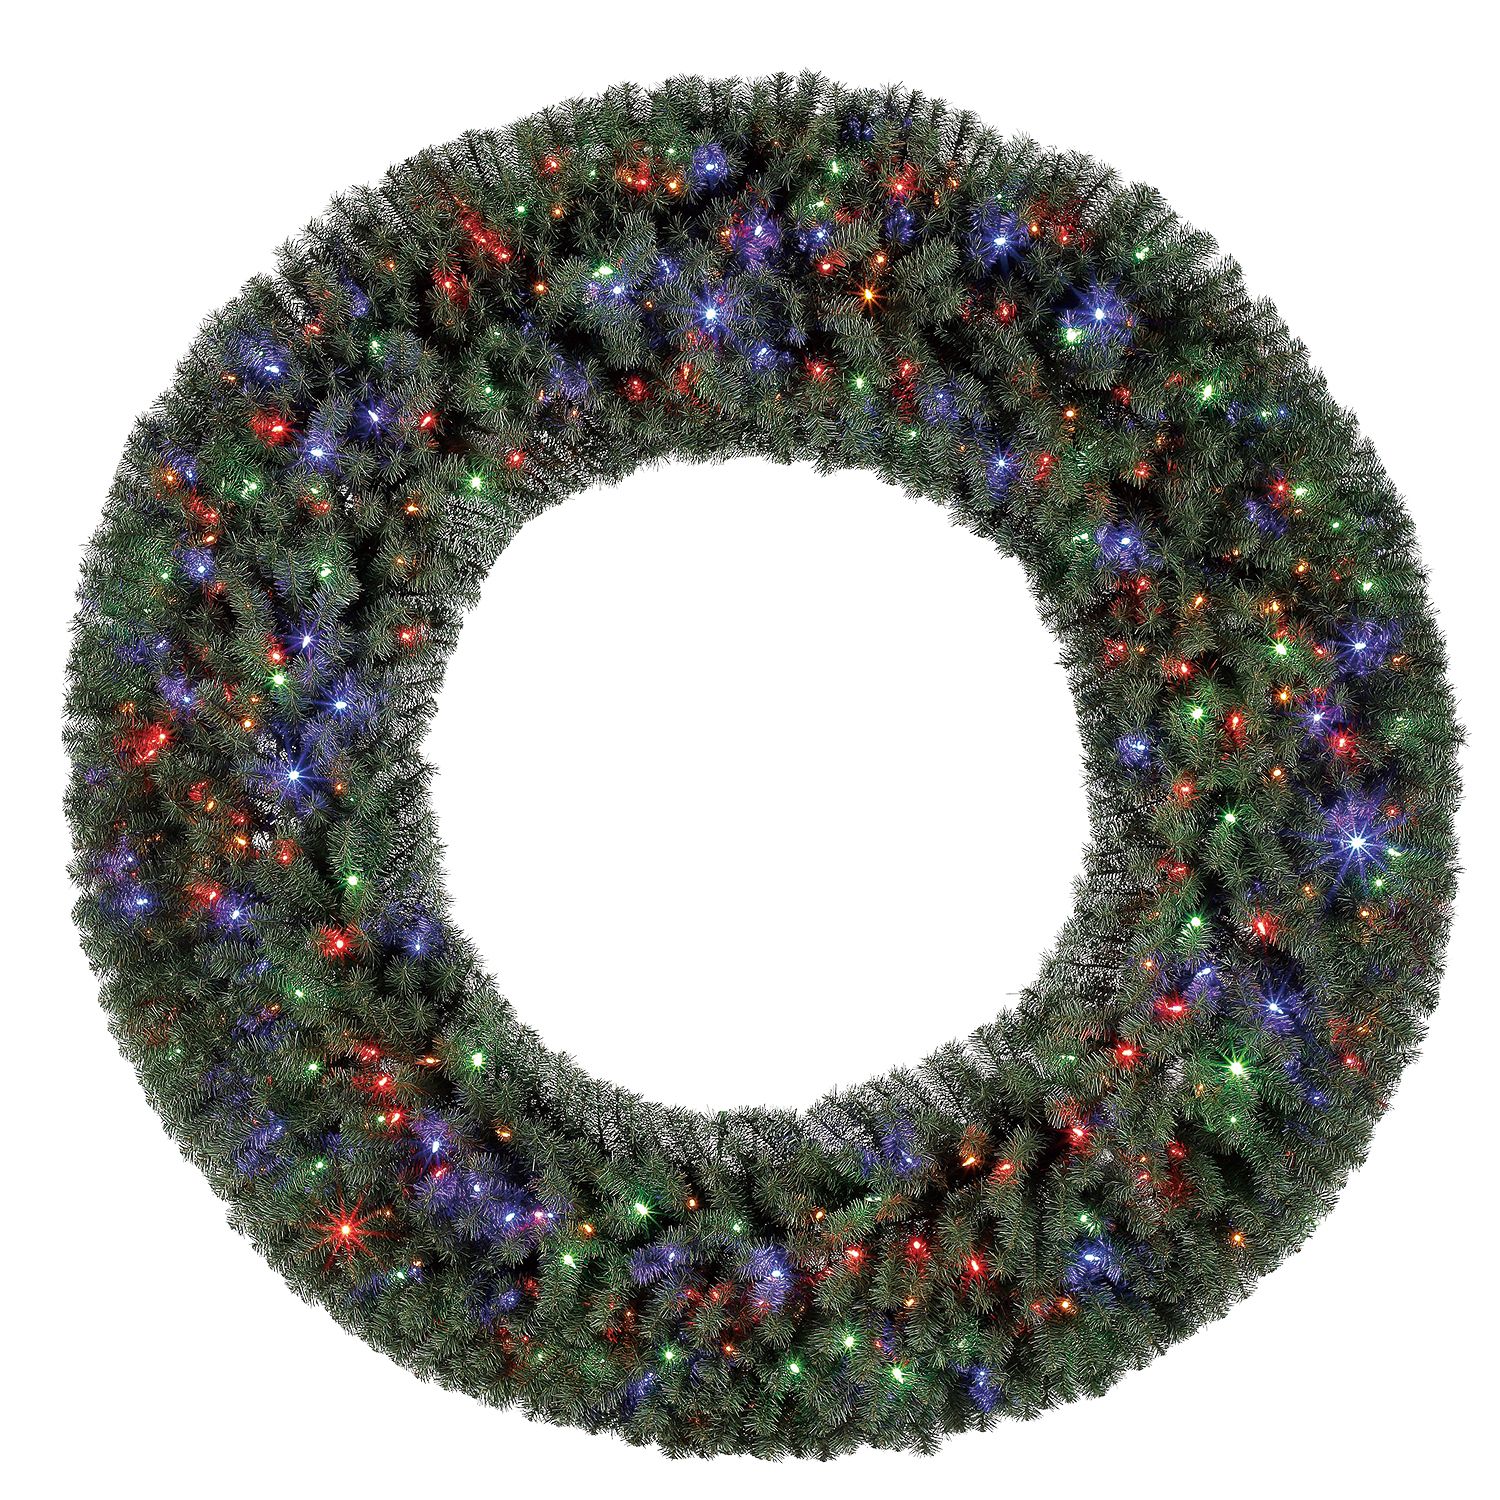 Image for Home Heritage 72 Inch Prelit Holiday Christmas Wreath with 400 Color LED Lights at Kohl's.